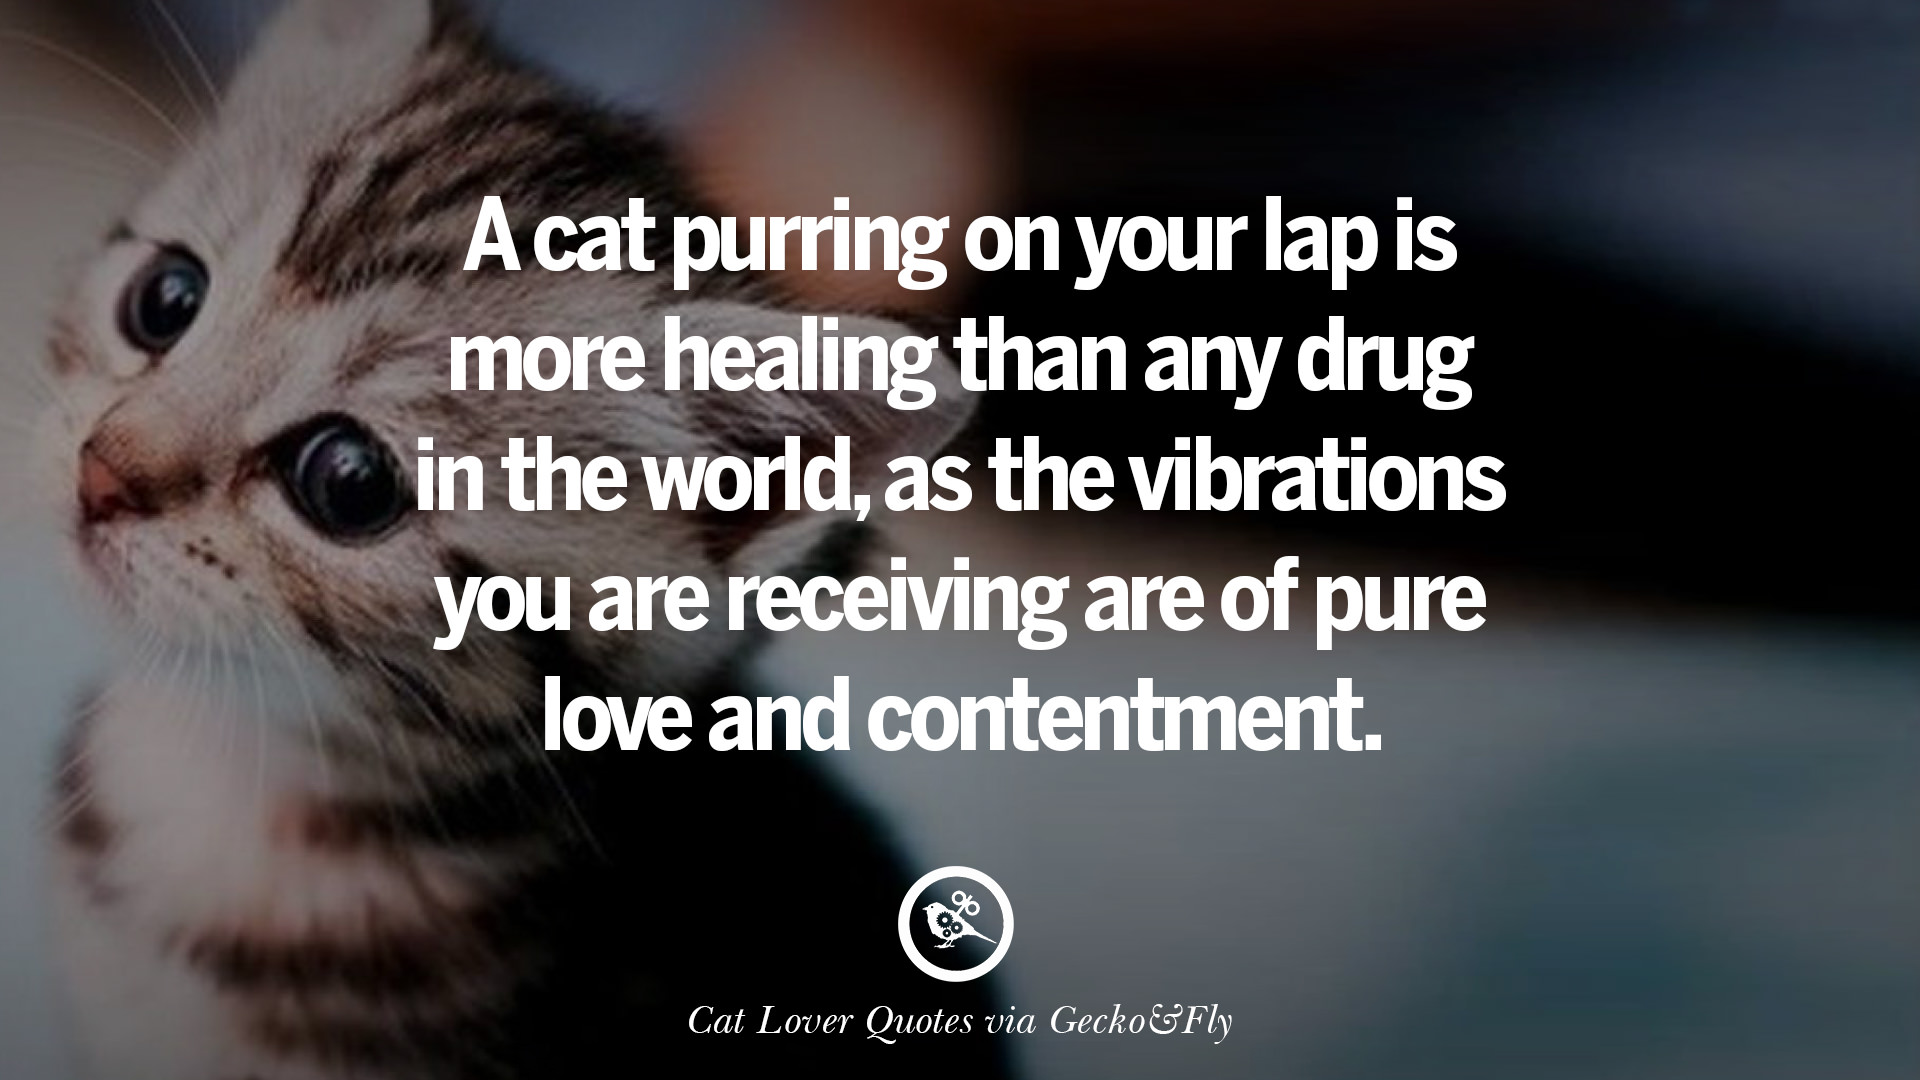 A cat purring on your lap is more healing than any in the world as the vibrations you are receiving are of pure love and contentment